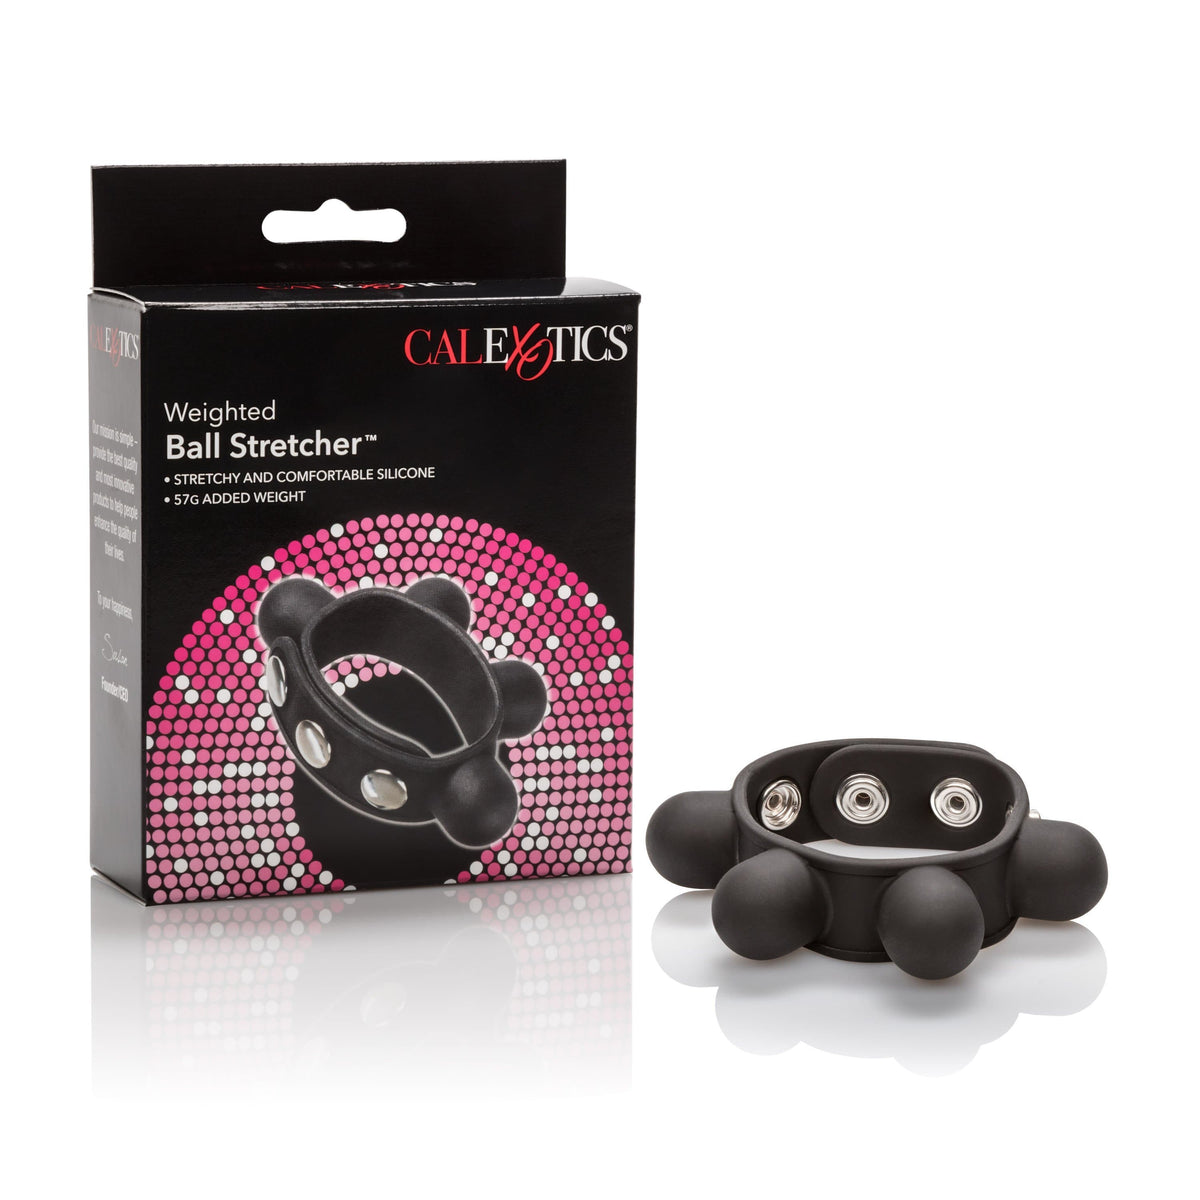 California Exotics - Weighted Ball Stretcher Cock Ring (Black) Silicone Cock Ring (Non Vibration) 716770088451 CherryAffairs